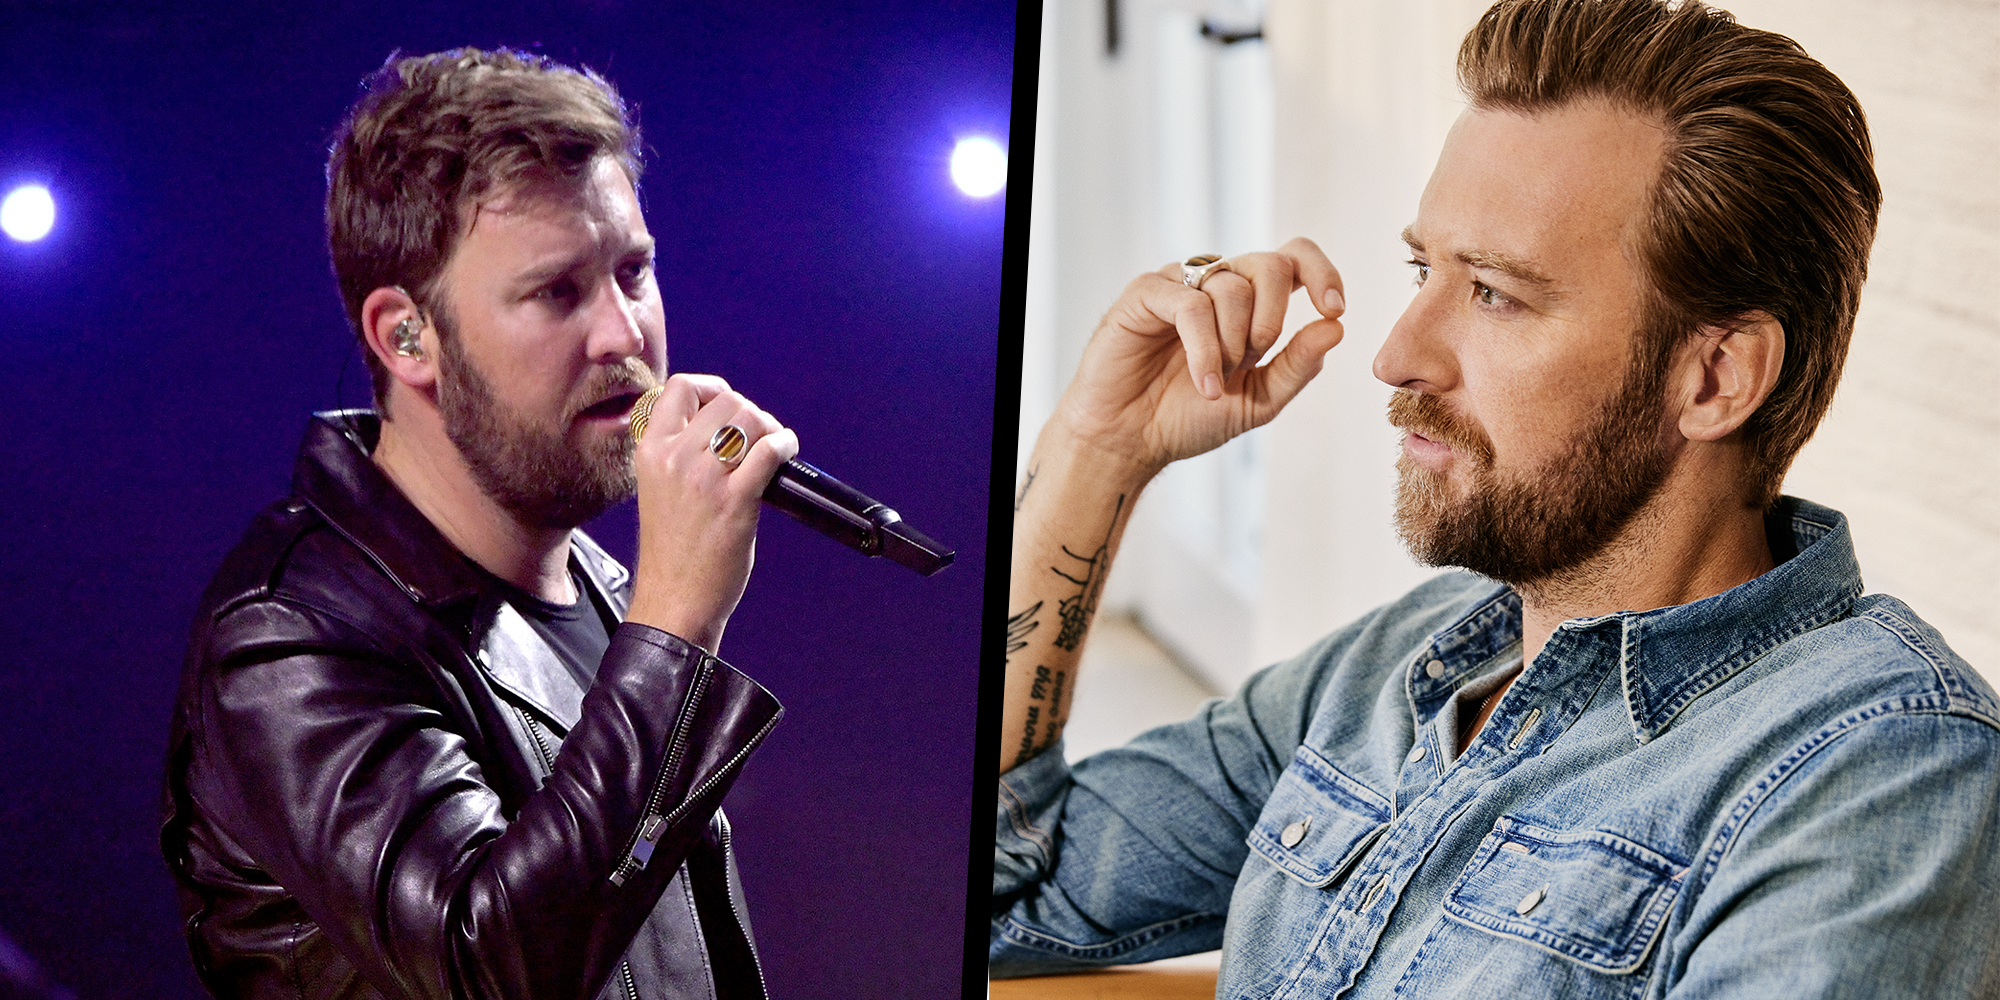 Brett Young Dishes on Writing Songs With Charles Kelley